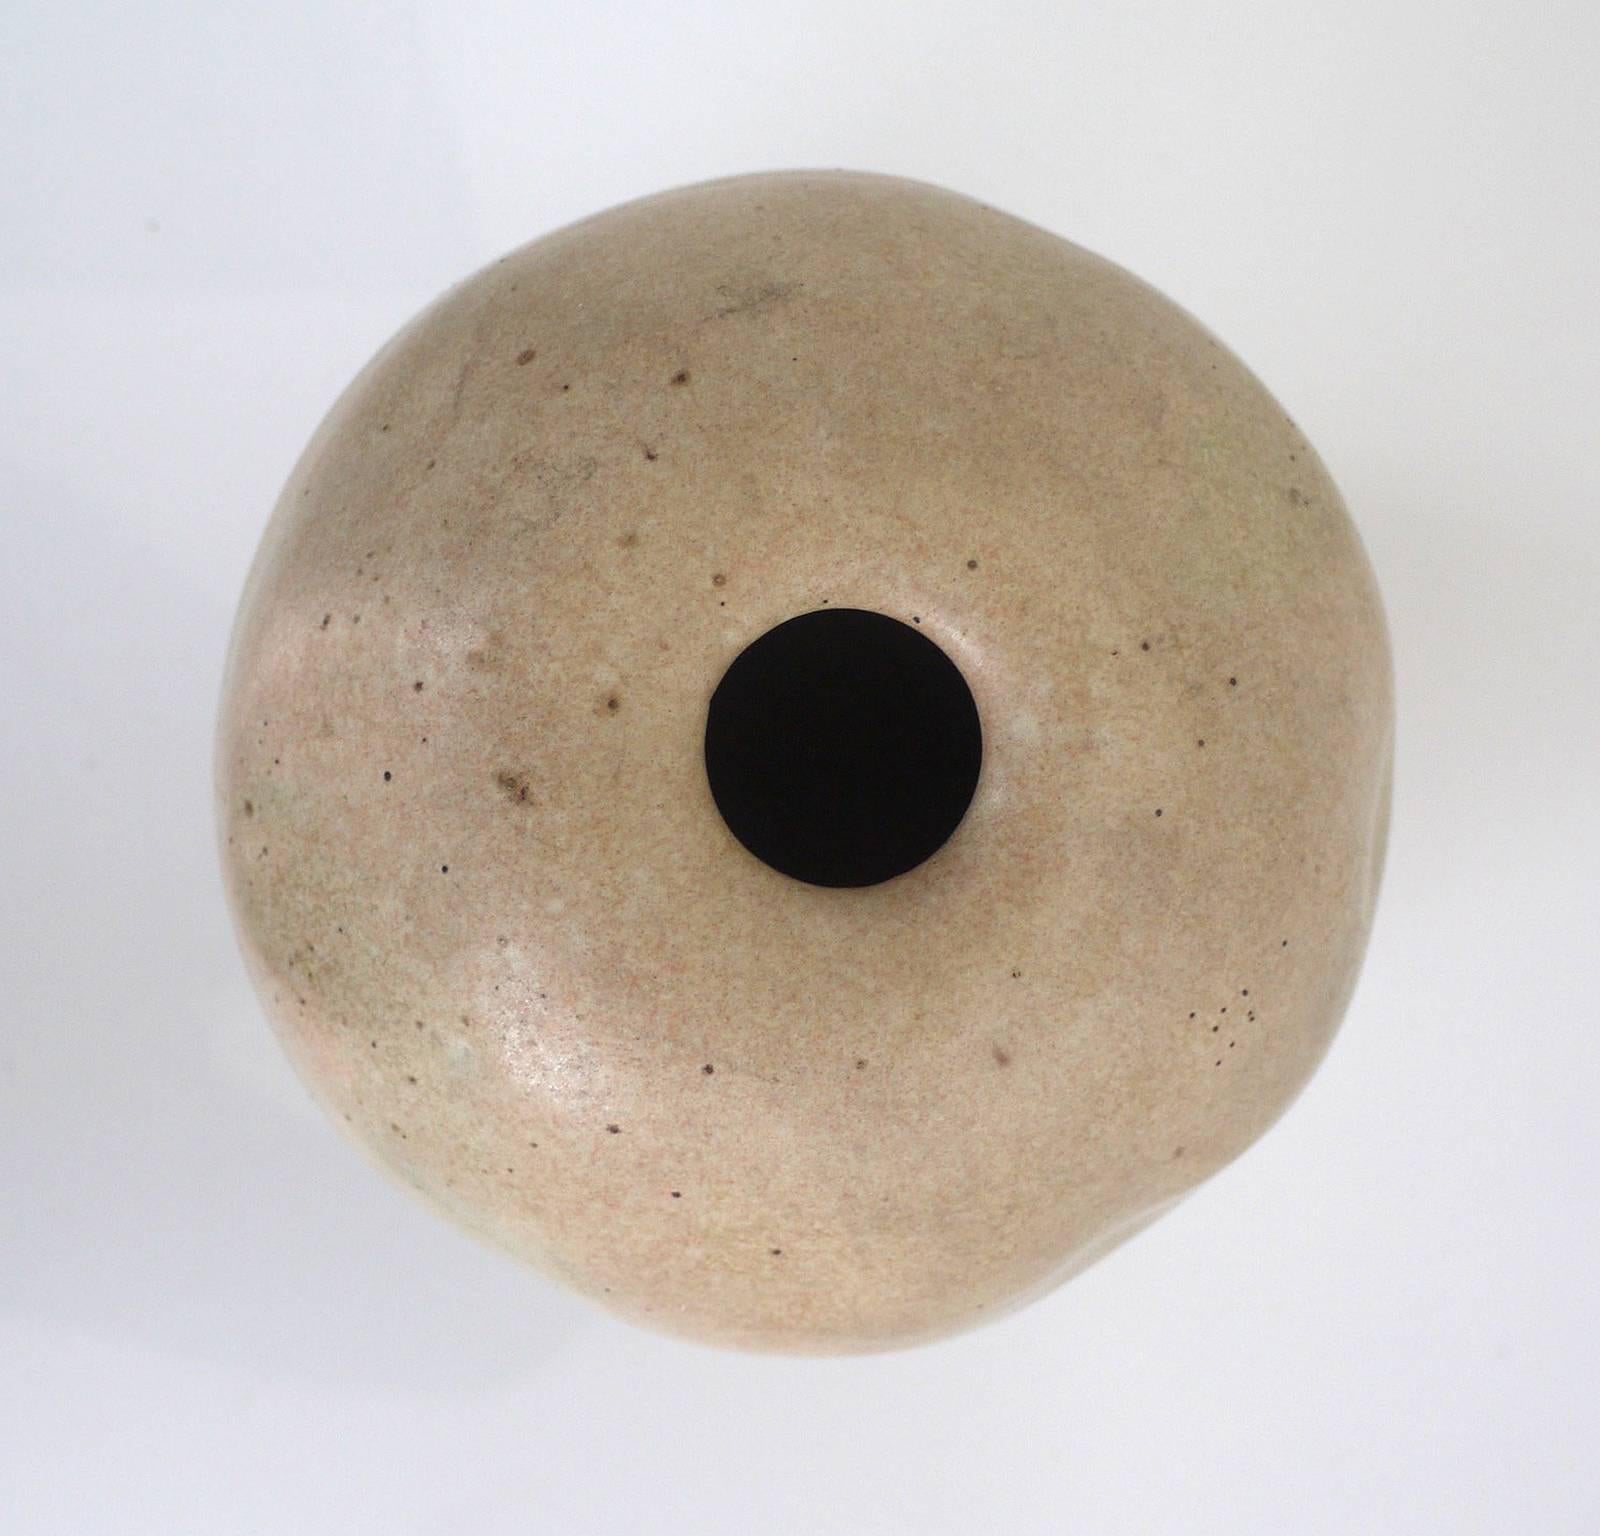 Unique Minimalist art pottery wood-fired ceramic vase made after his trip to Japan in the first Japanese anagama wood oven in Germany.
Horst Kerstan, own studio, from Kandern, Germany was an outstanding ceramist.